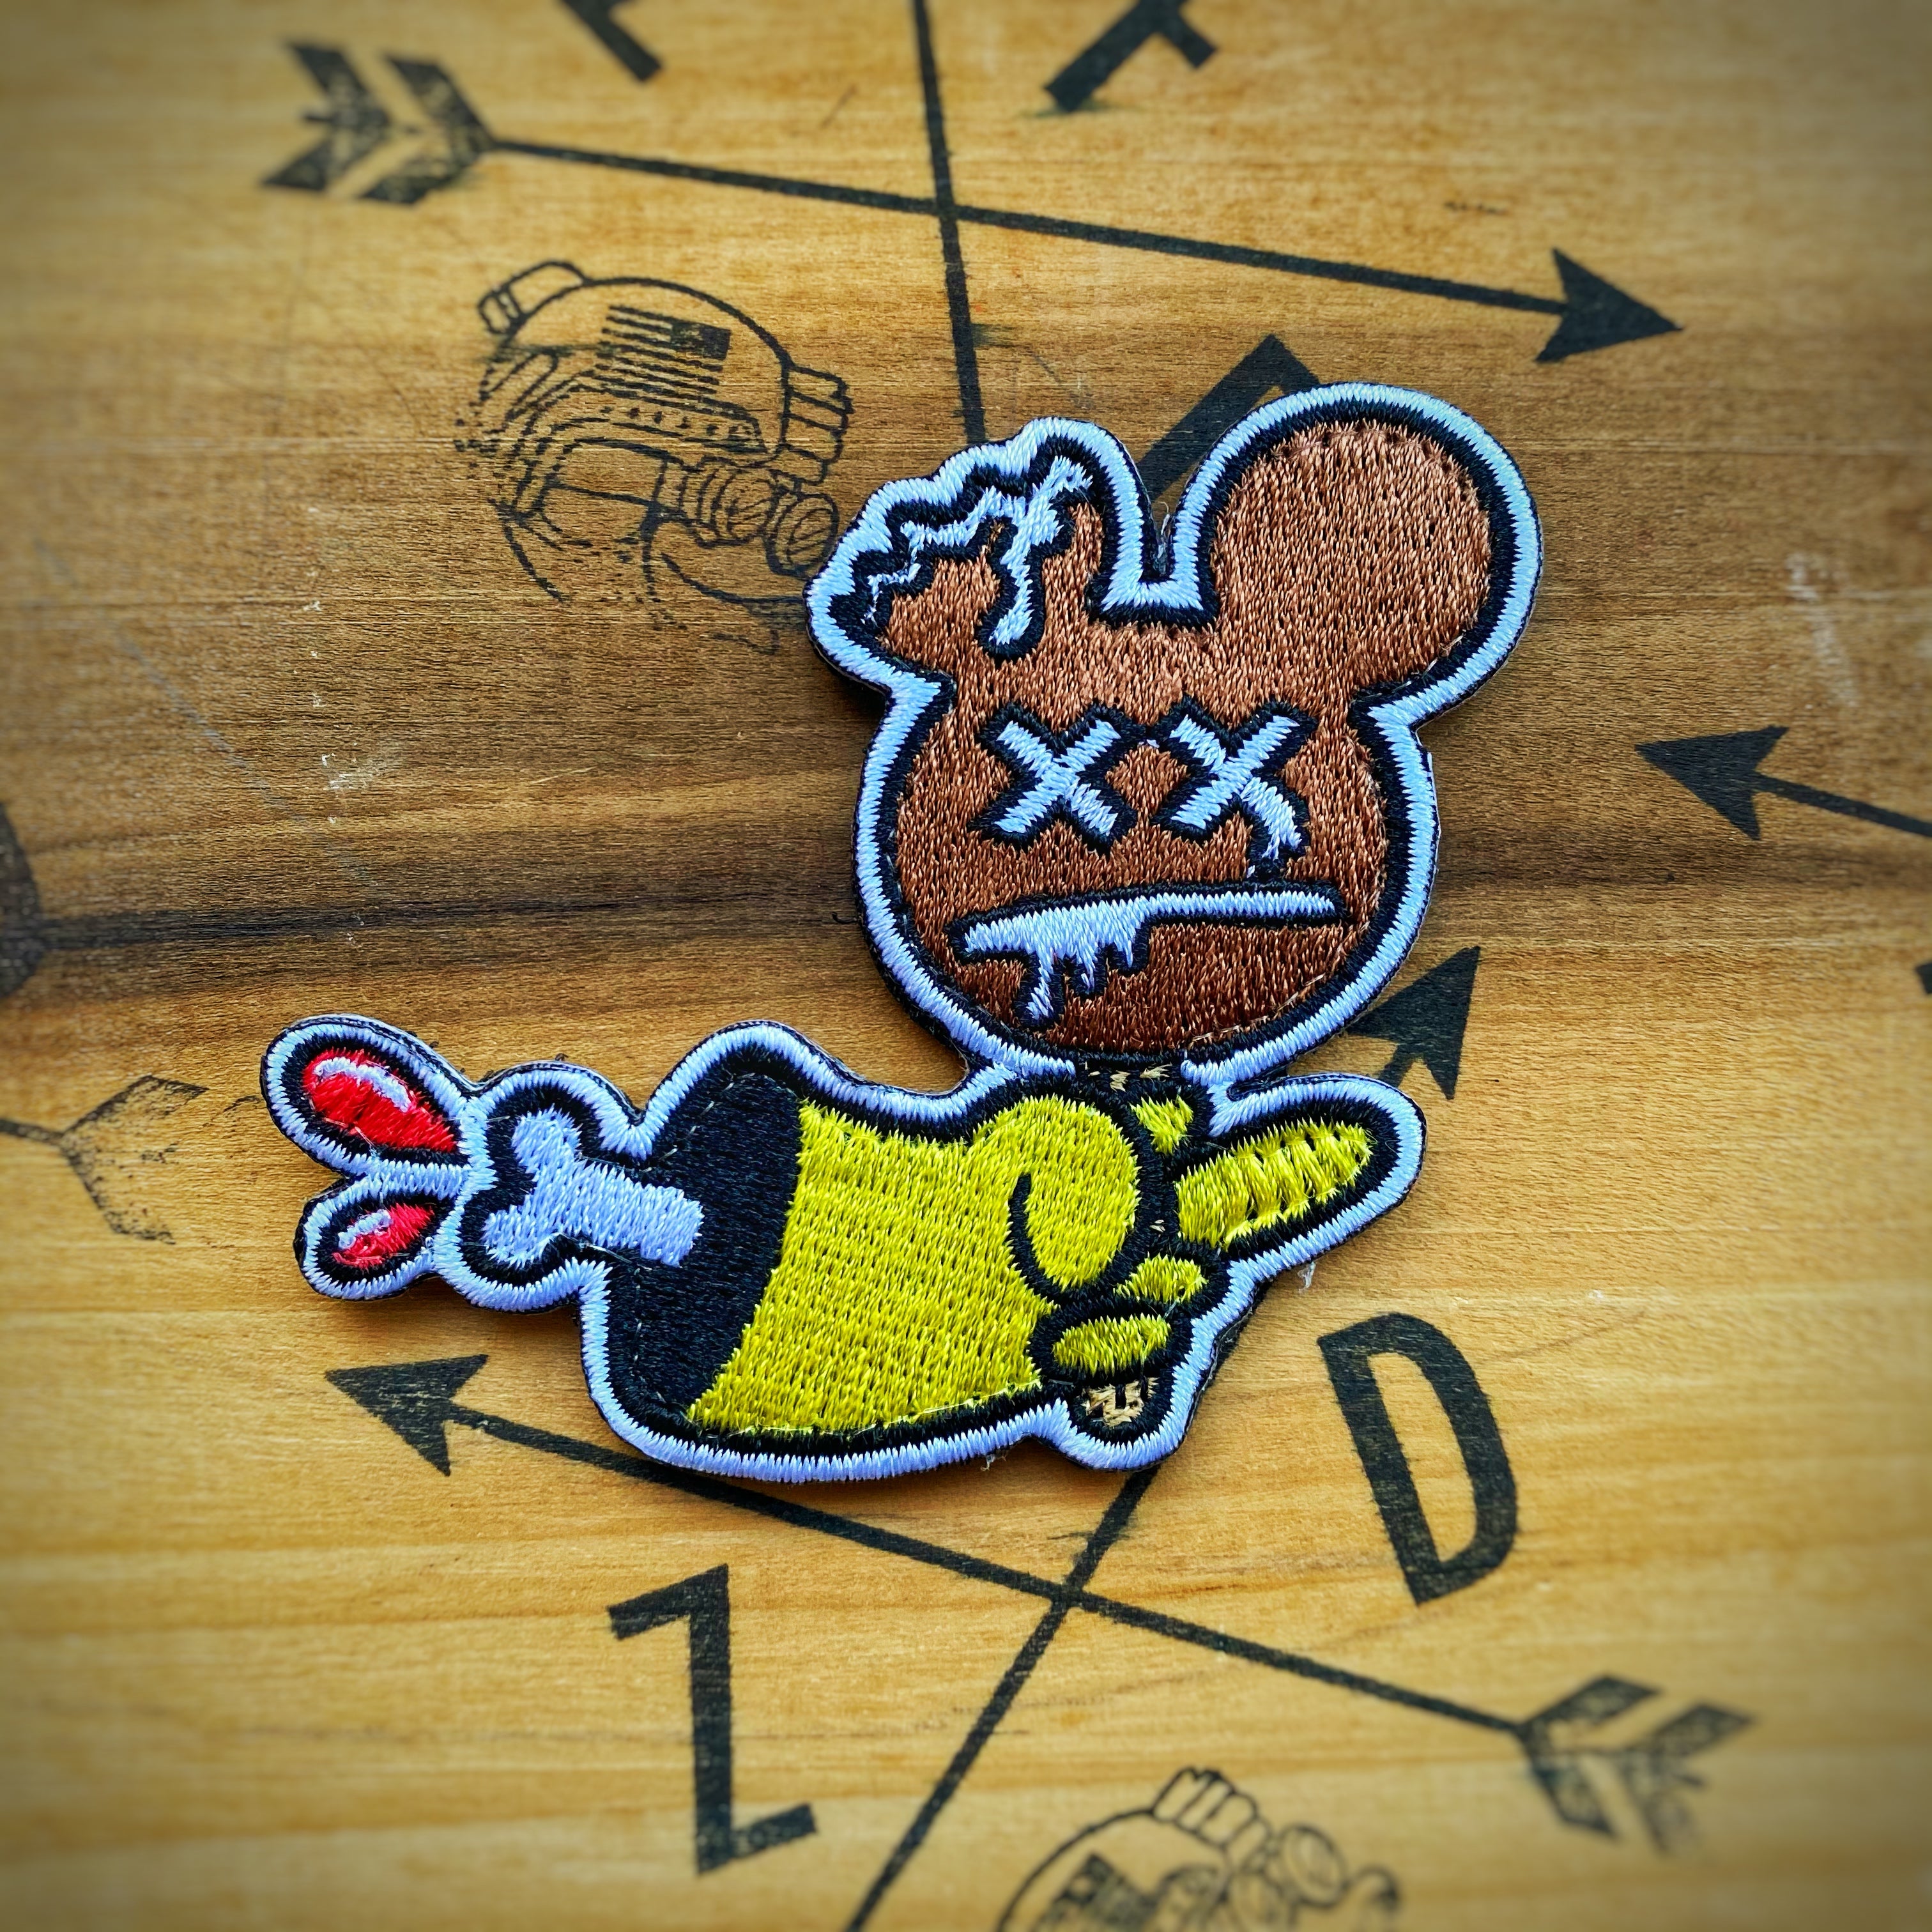 Zero Fucks Duck® "ZFD" Cold Dead Wing Melted Mouse Morale Patch